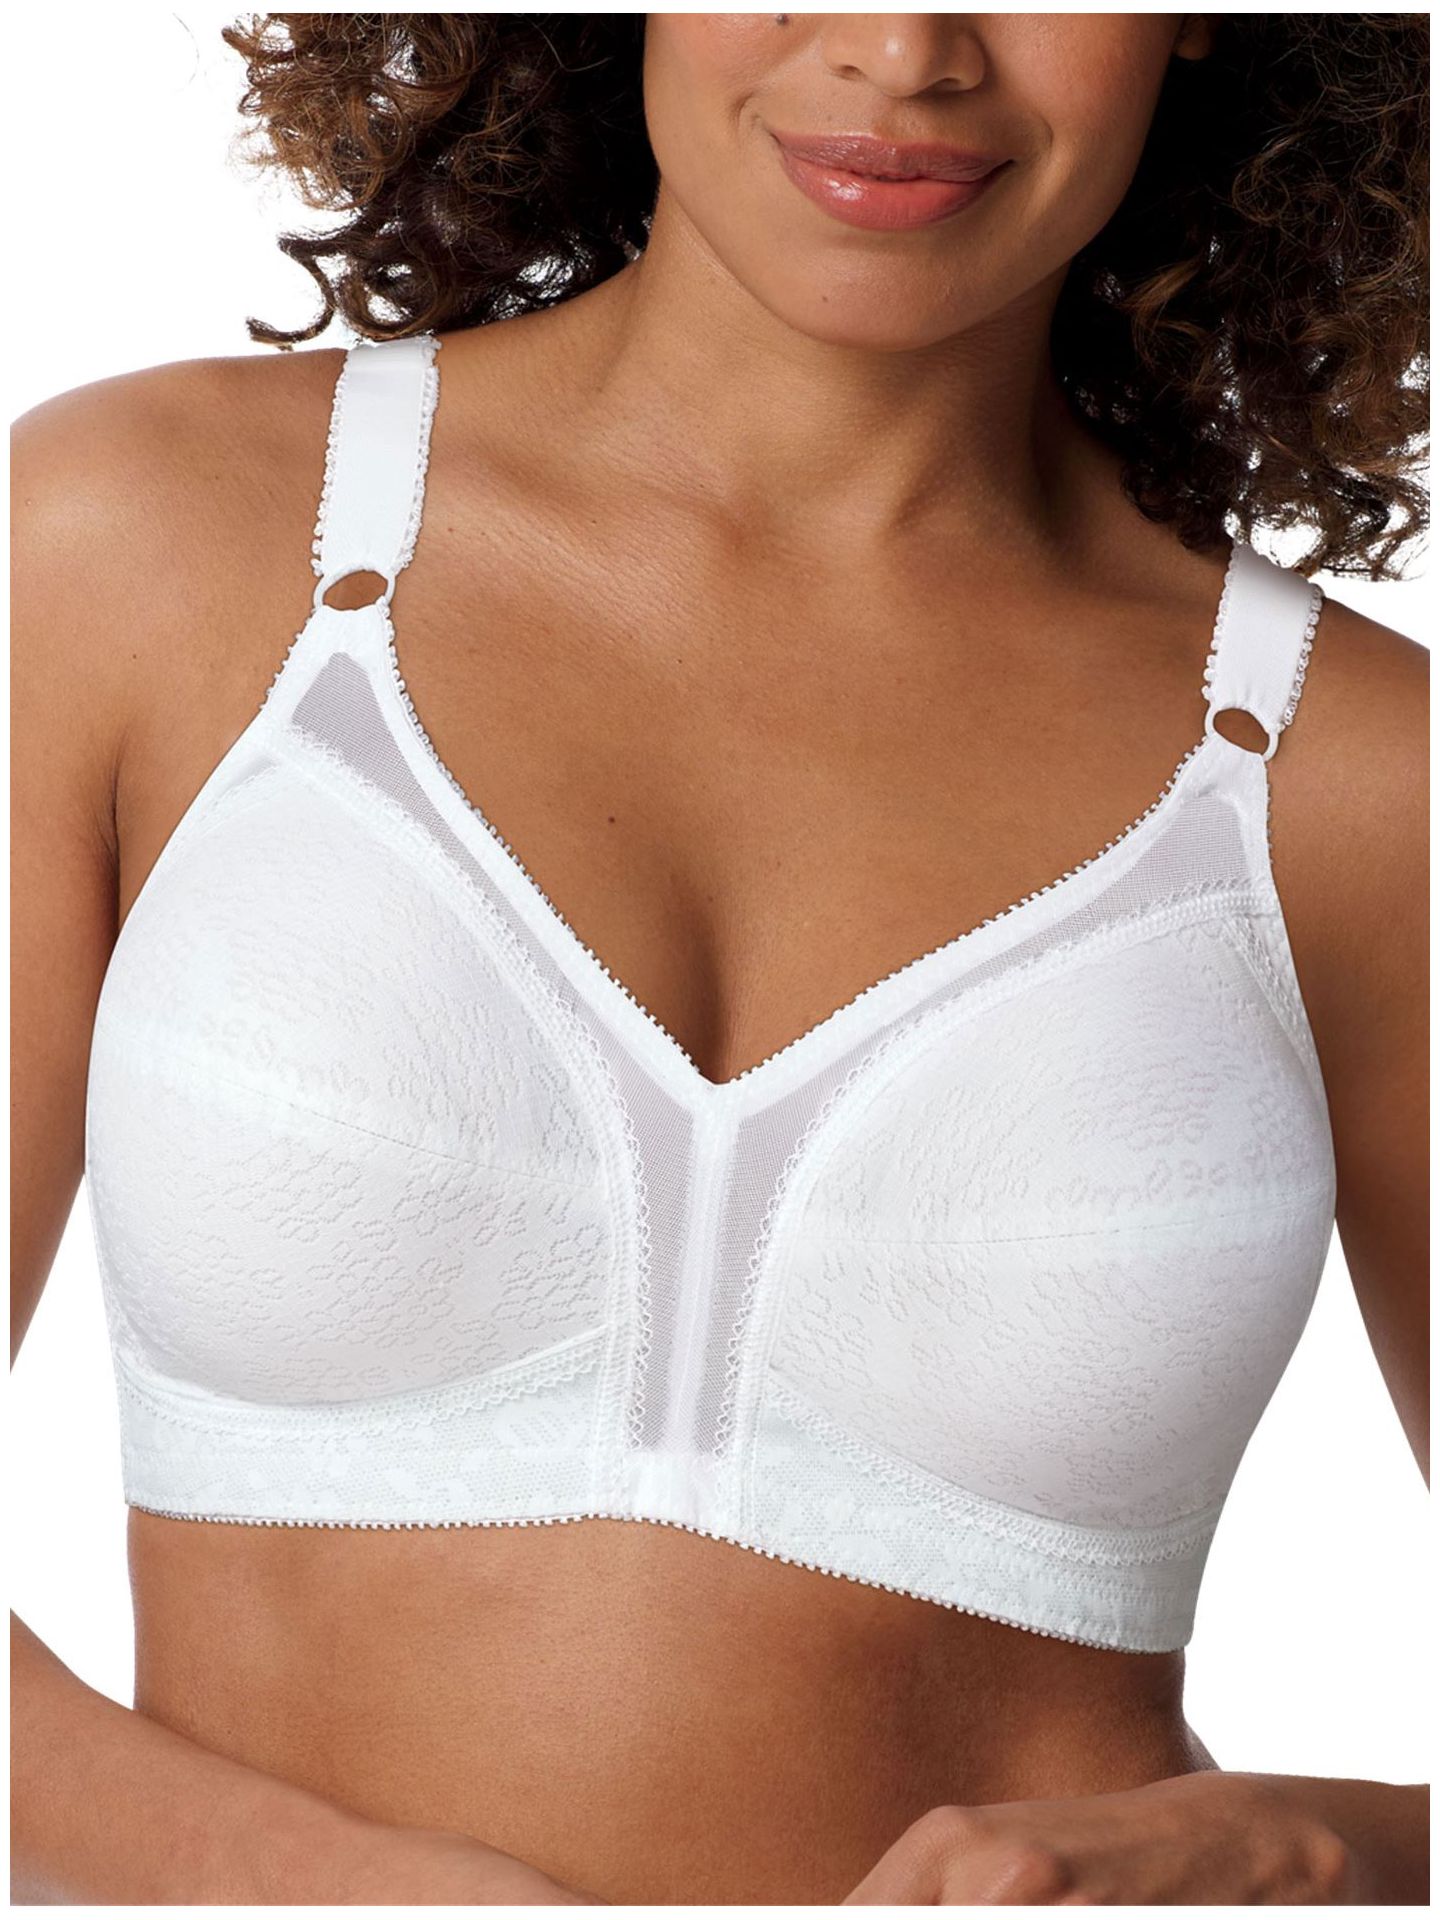 Playtex Women's 18 Hour Lace-Cup Wire-Free Bra, White, 36B